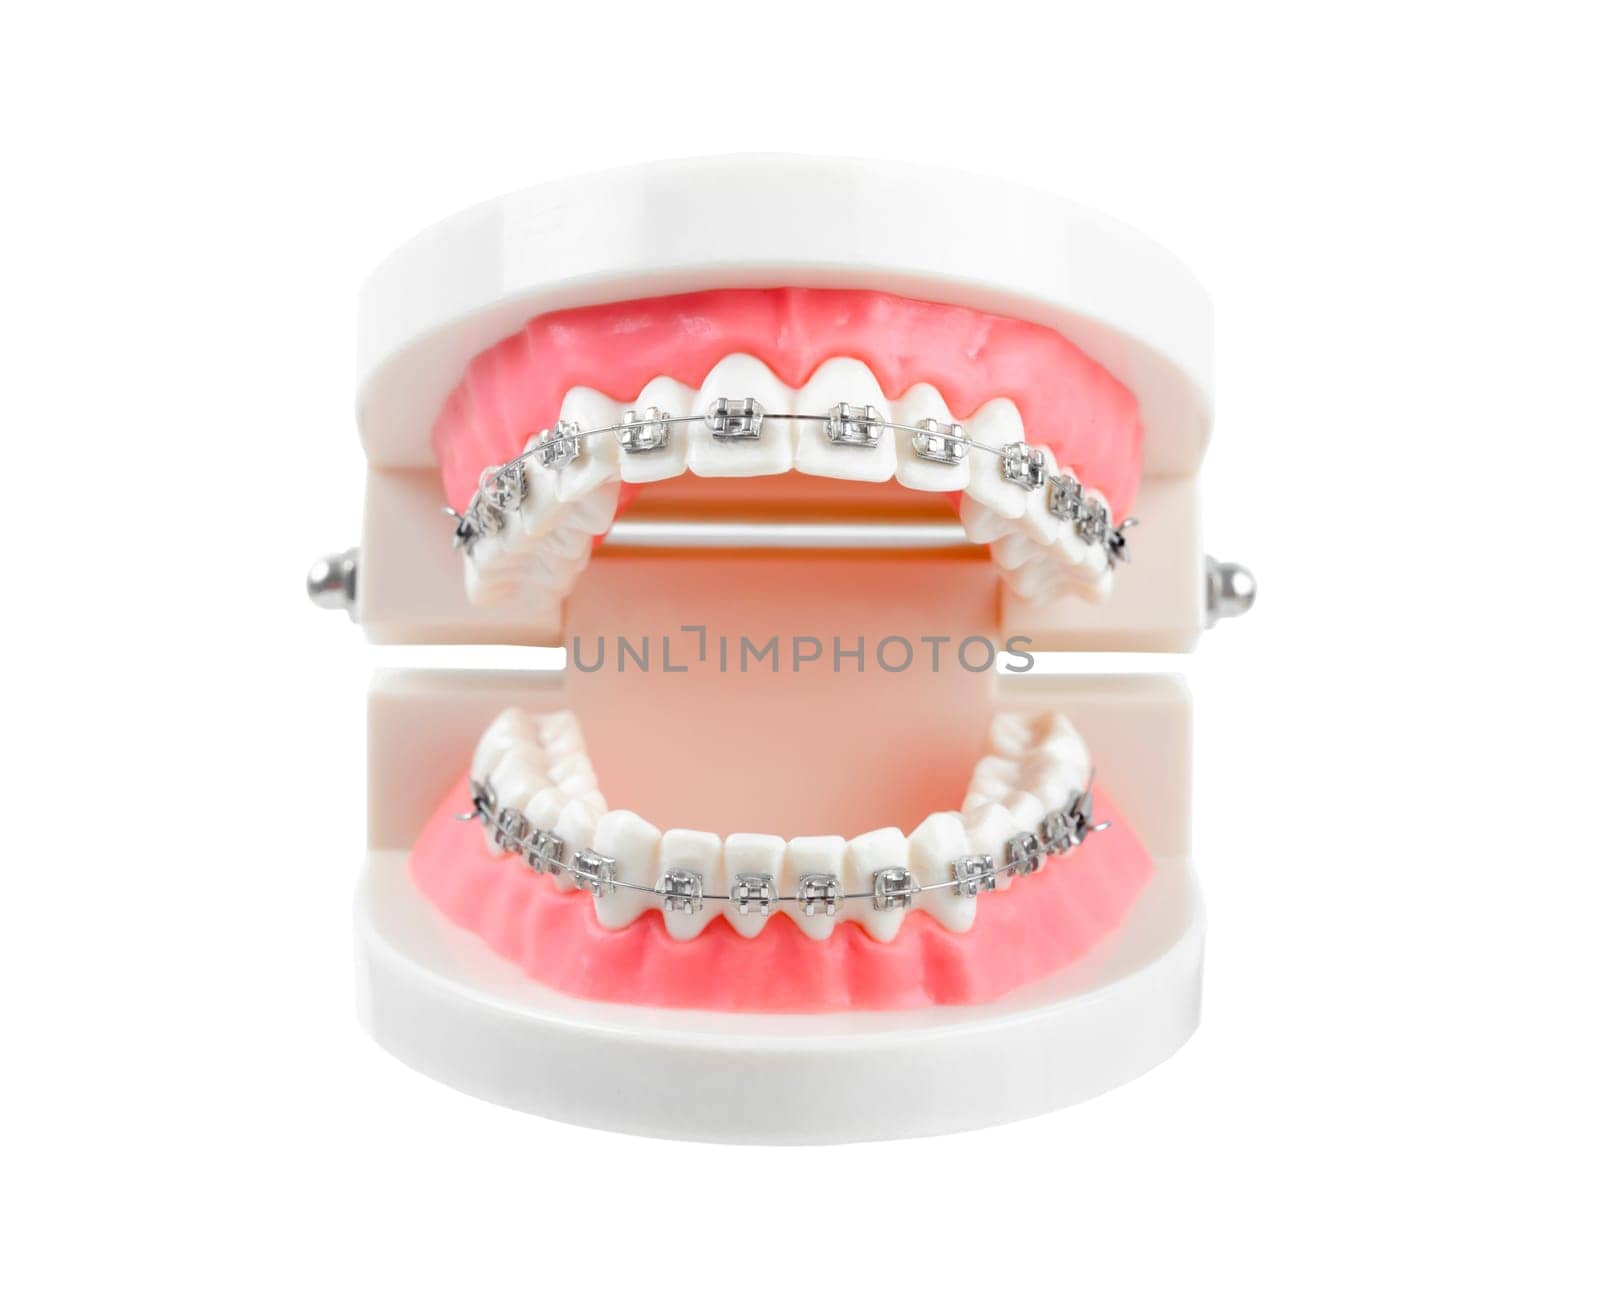 Teeth model with metal wire dental braces or dental instruments isolated on white background, Save clipping path.